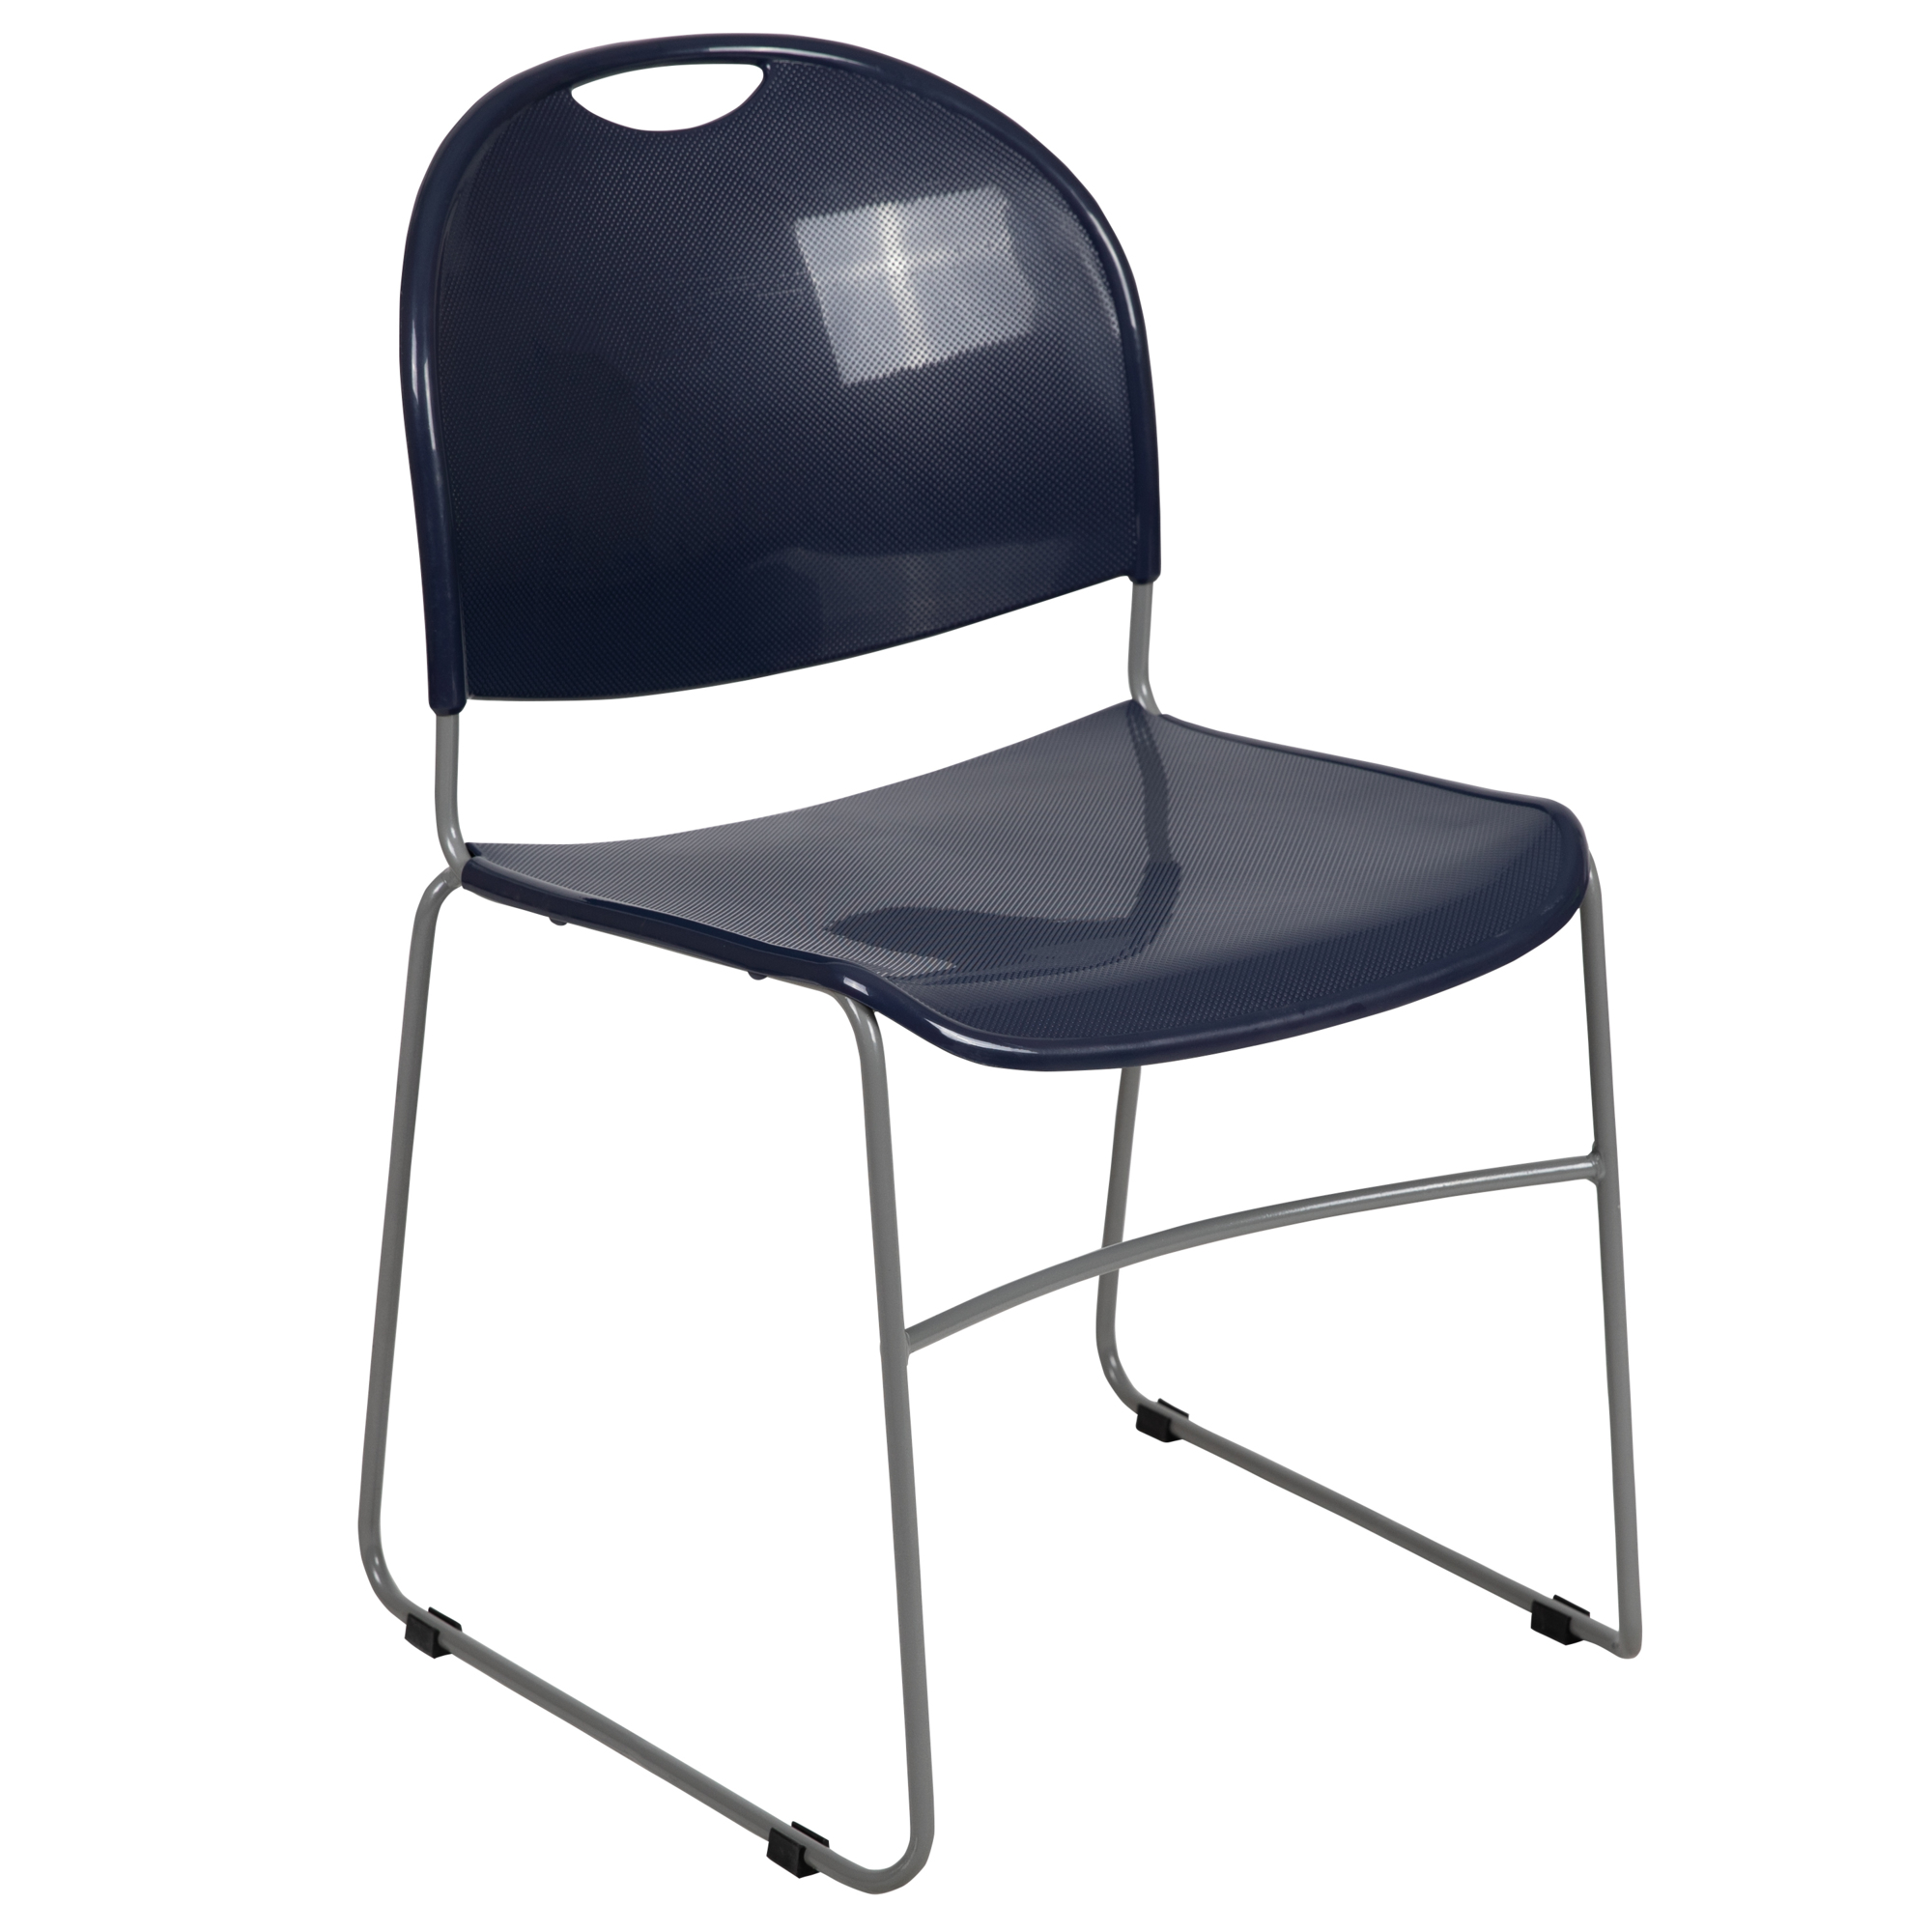 Flash Furniture, Navy Compact School Stack Chair - Guest Chair, Primary Color Blue, Included (qty.) 1, Model RUT188NY